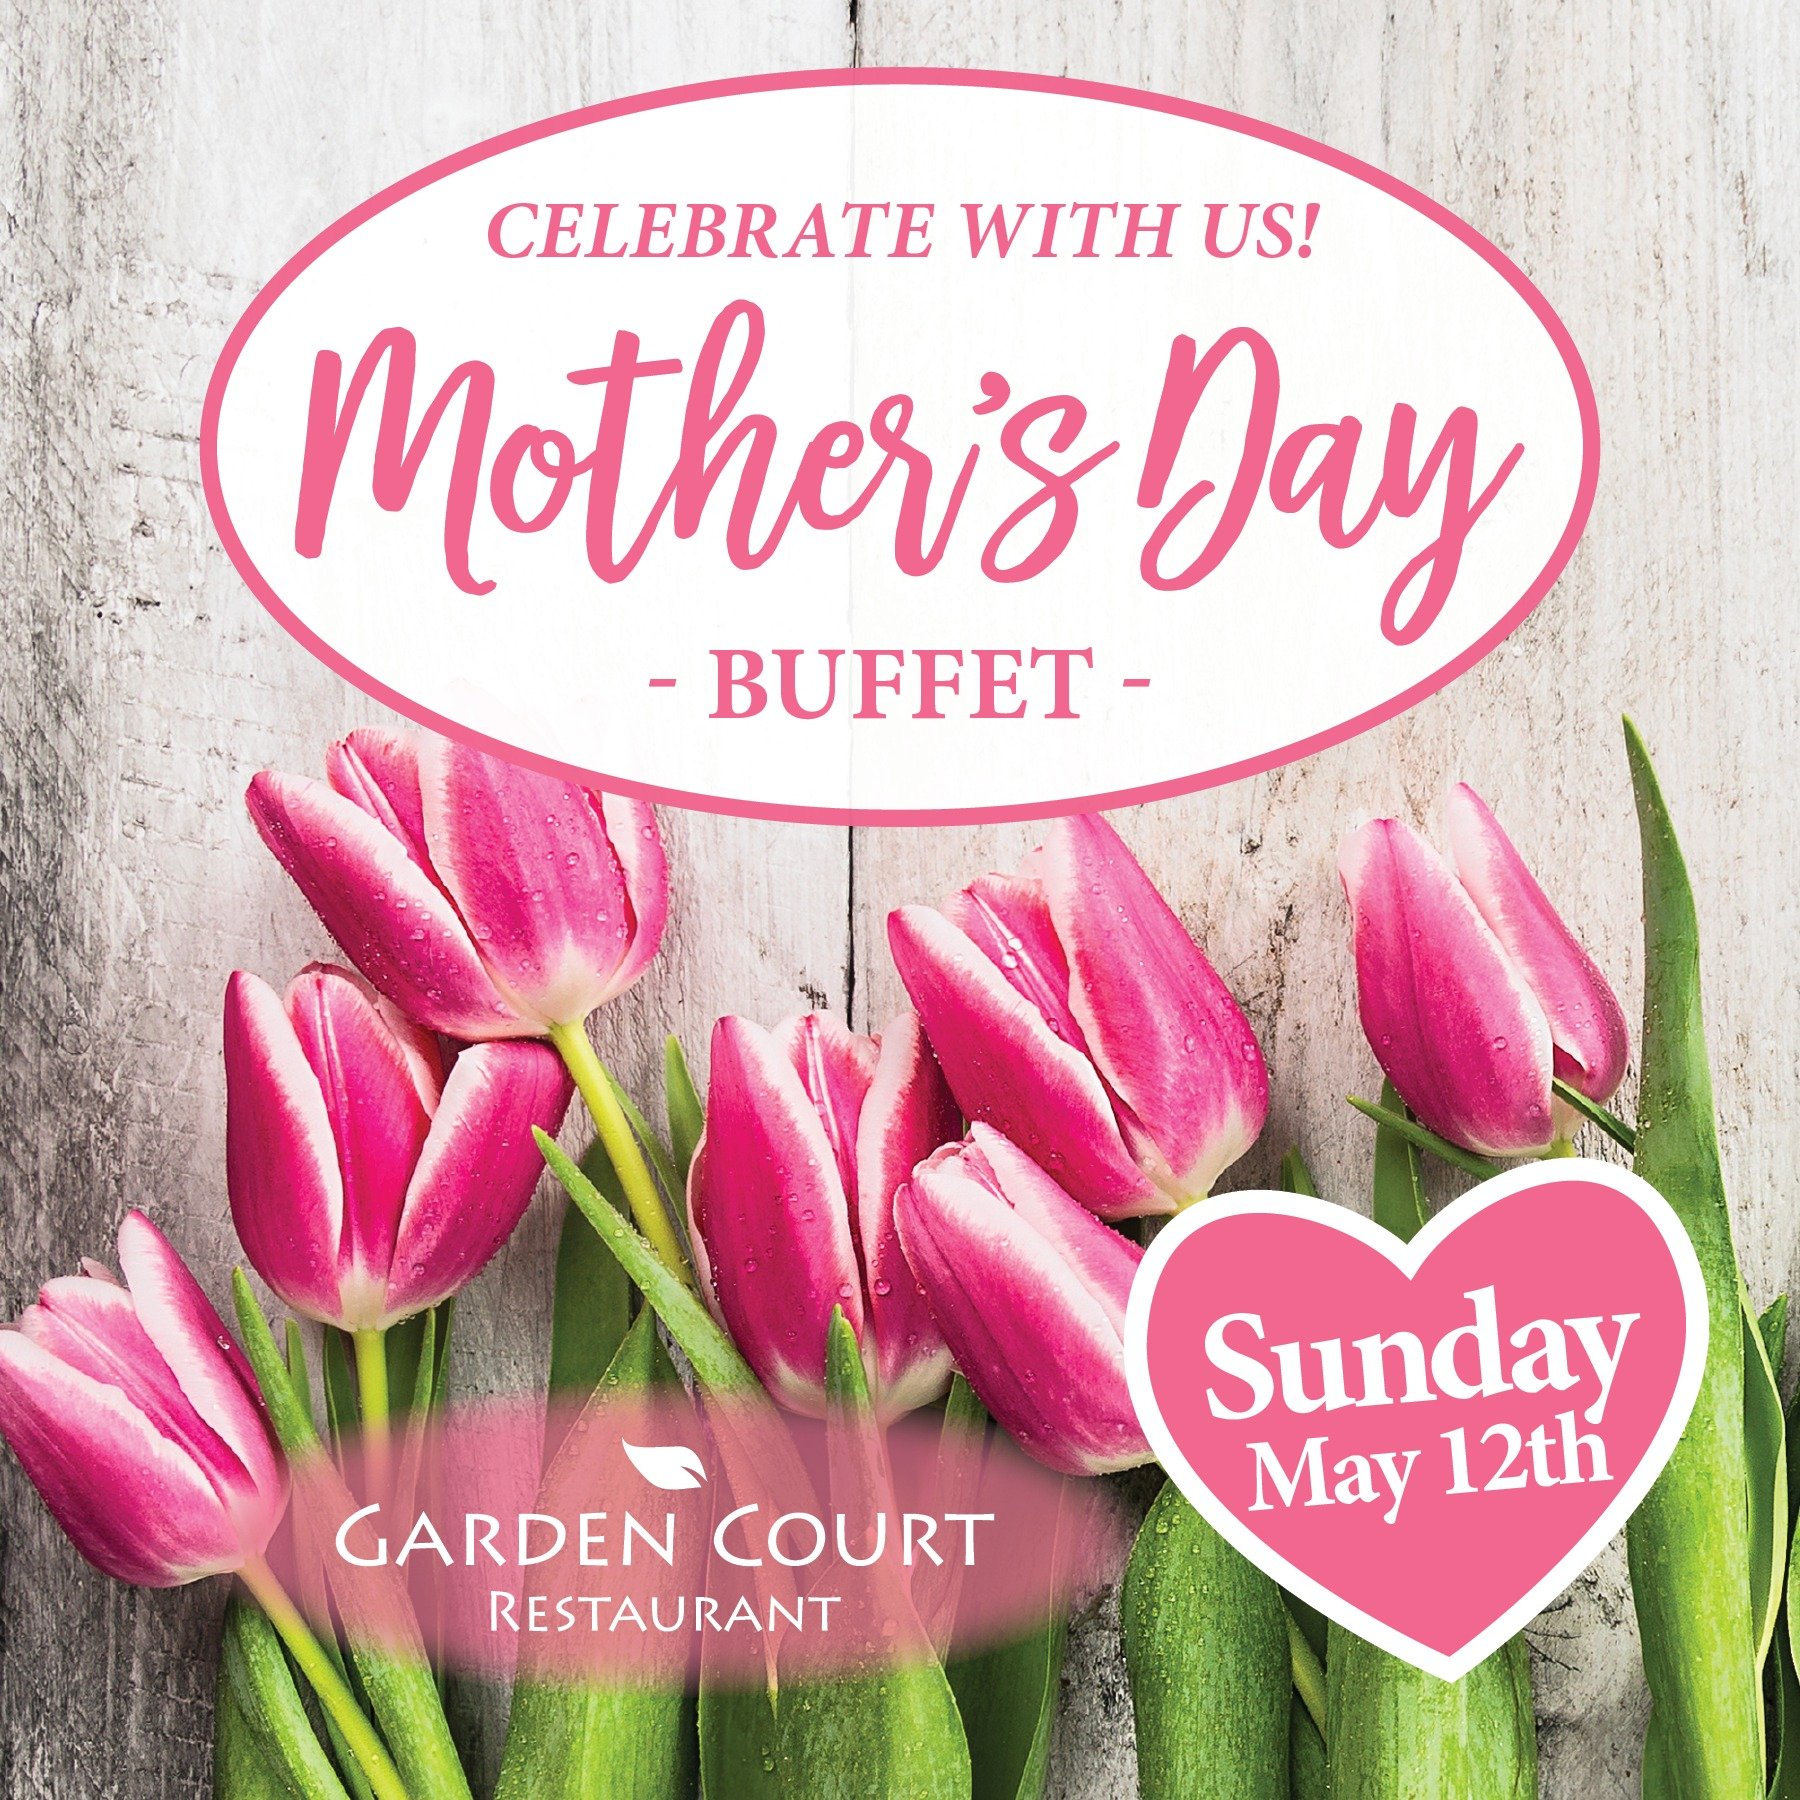 This Mother's Day treat ❤️ mom ❤️ to our special brunch buffet, available Sunday, May 12th at the Garden Court Restaurant! Our buffet will run from 8am until 2pm.
.
Reservations are highly recommended, please call 604.485.3000 to book your table toda